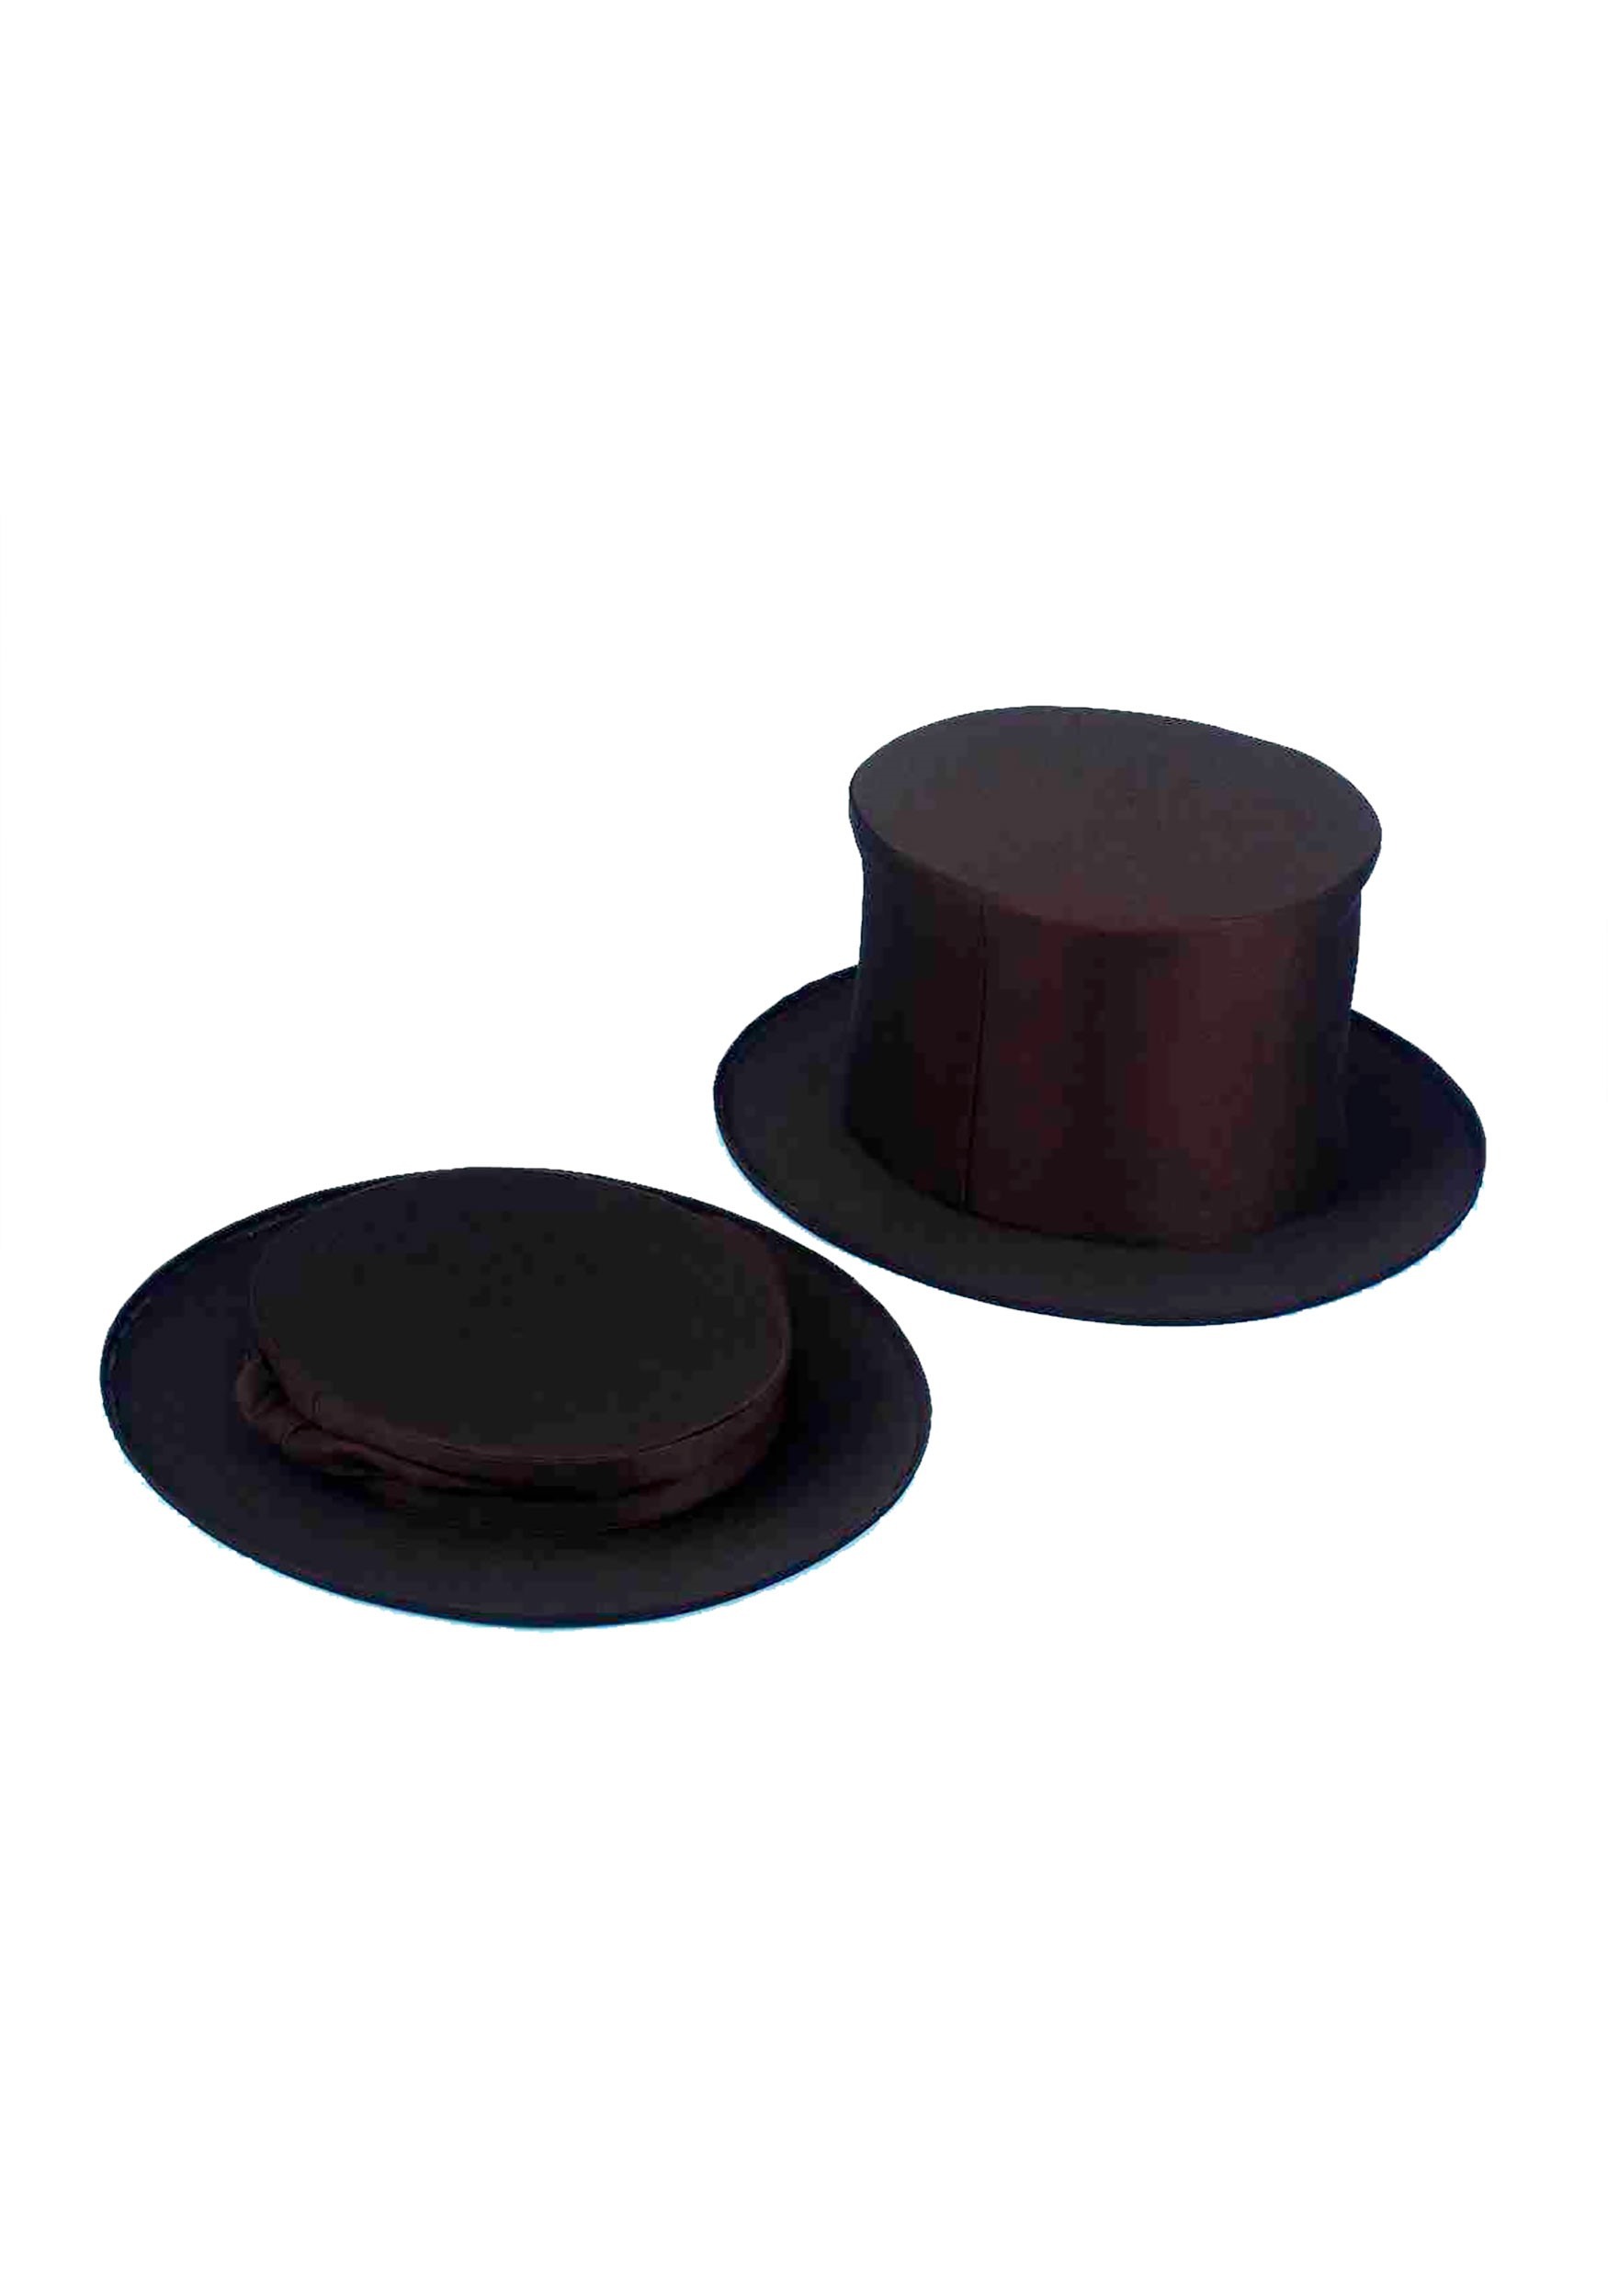 Collapsible Black Top Hat Accessory Kids